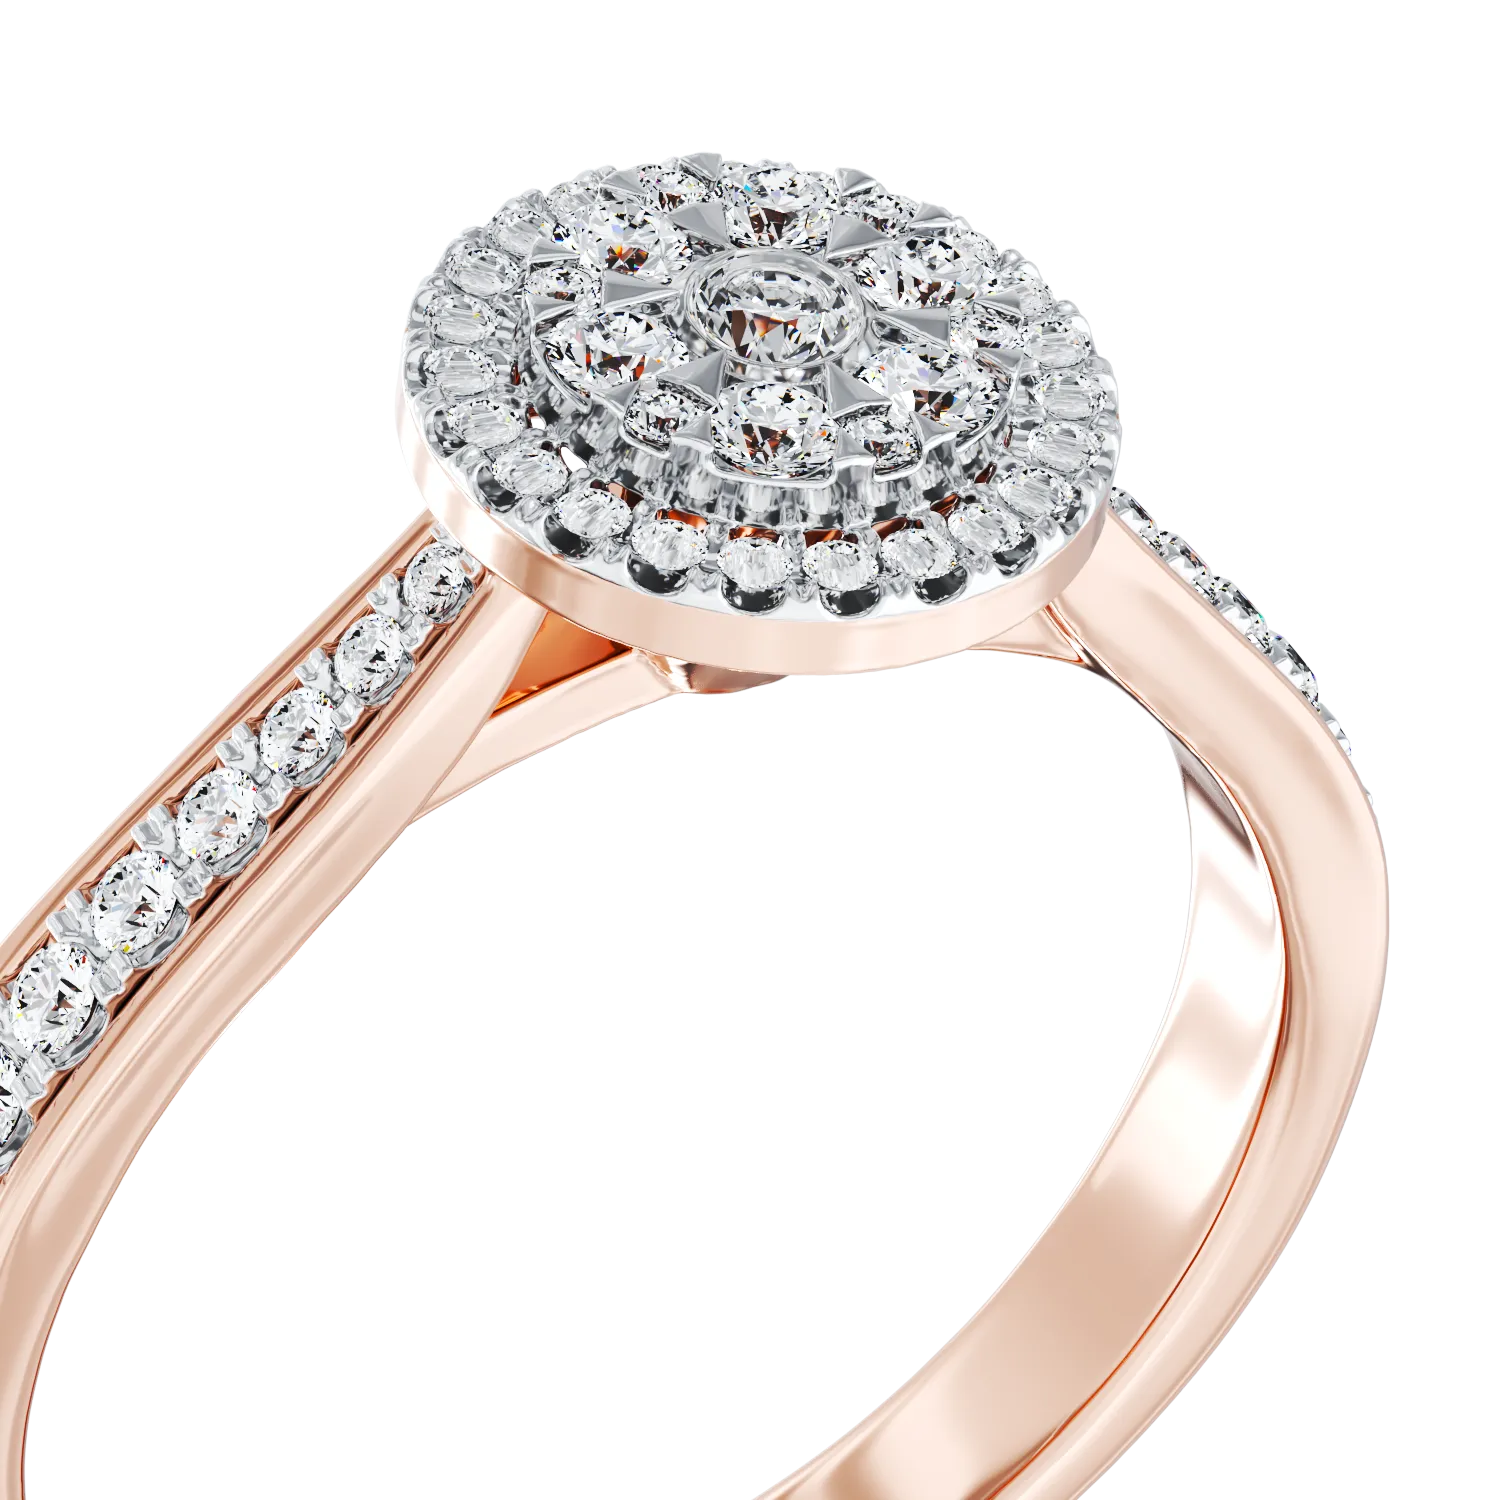 18K rose gold engagement ring with diamonds of 0.427ct